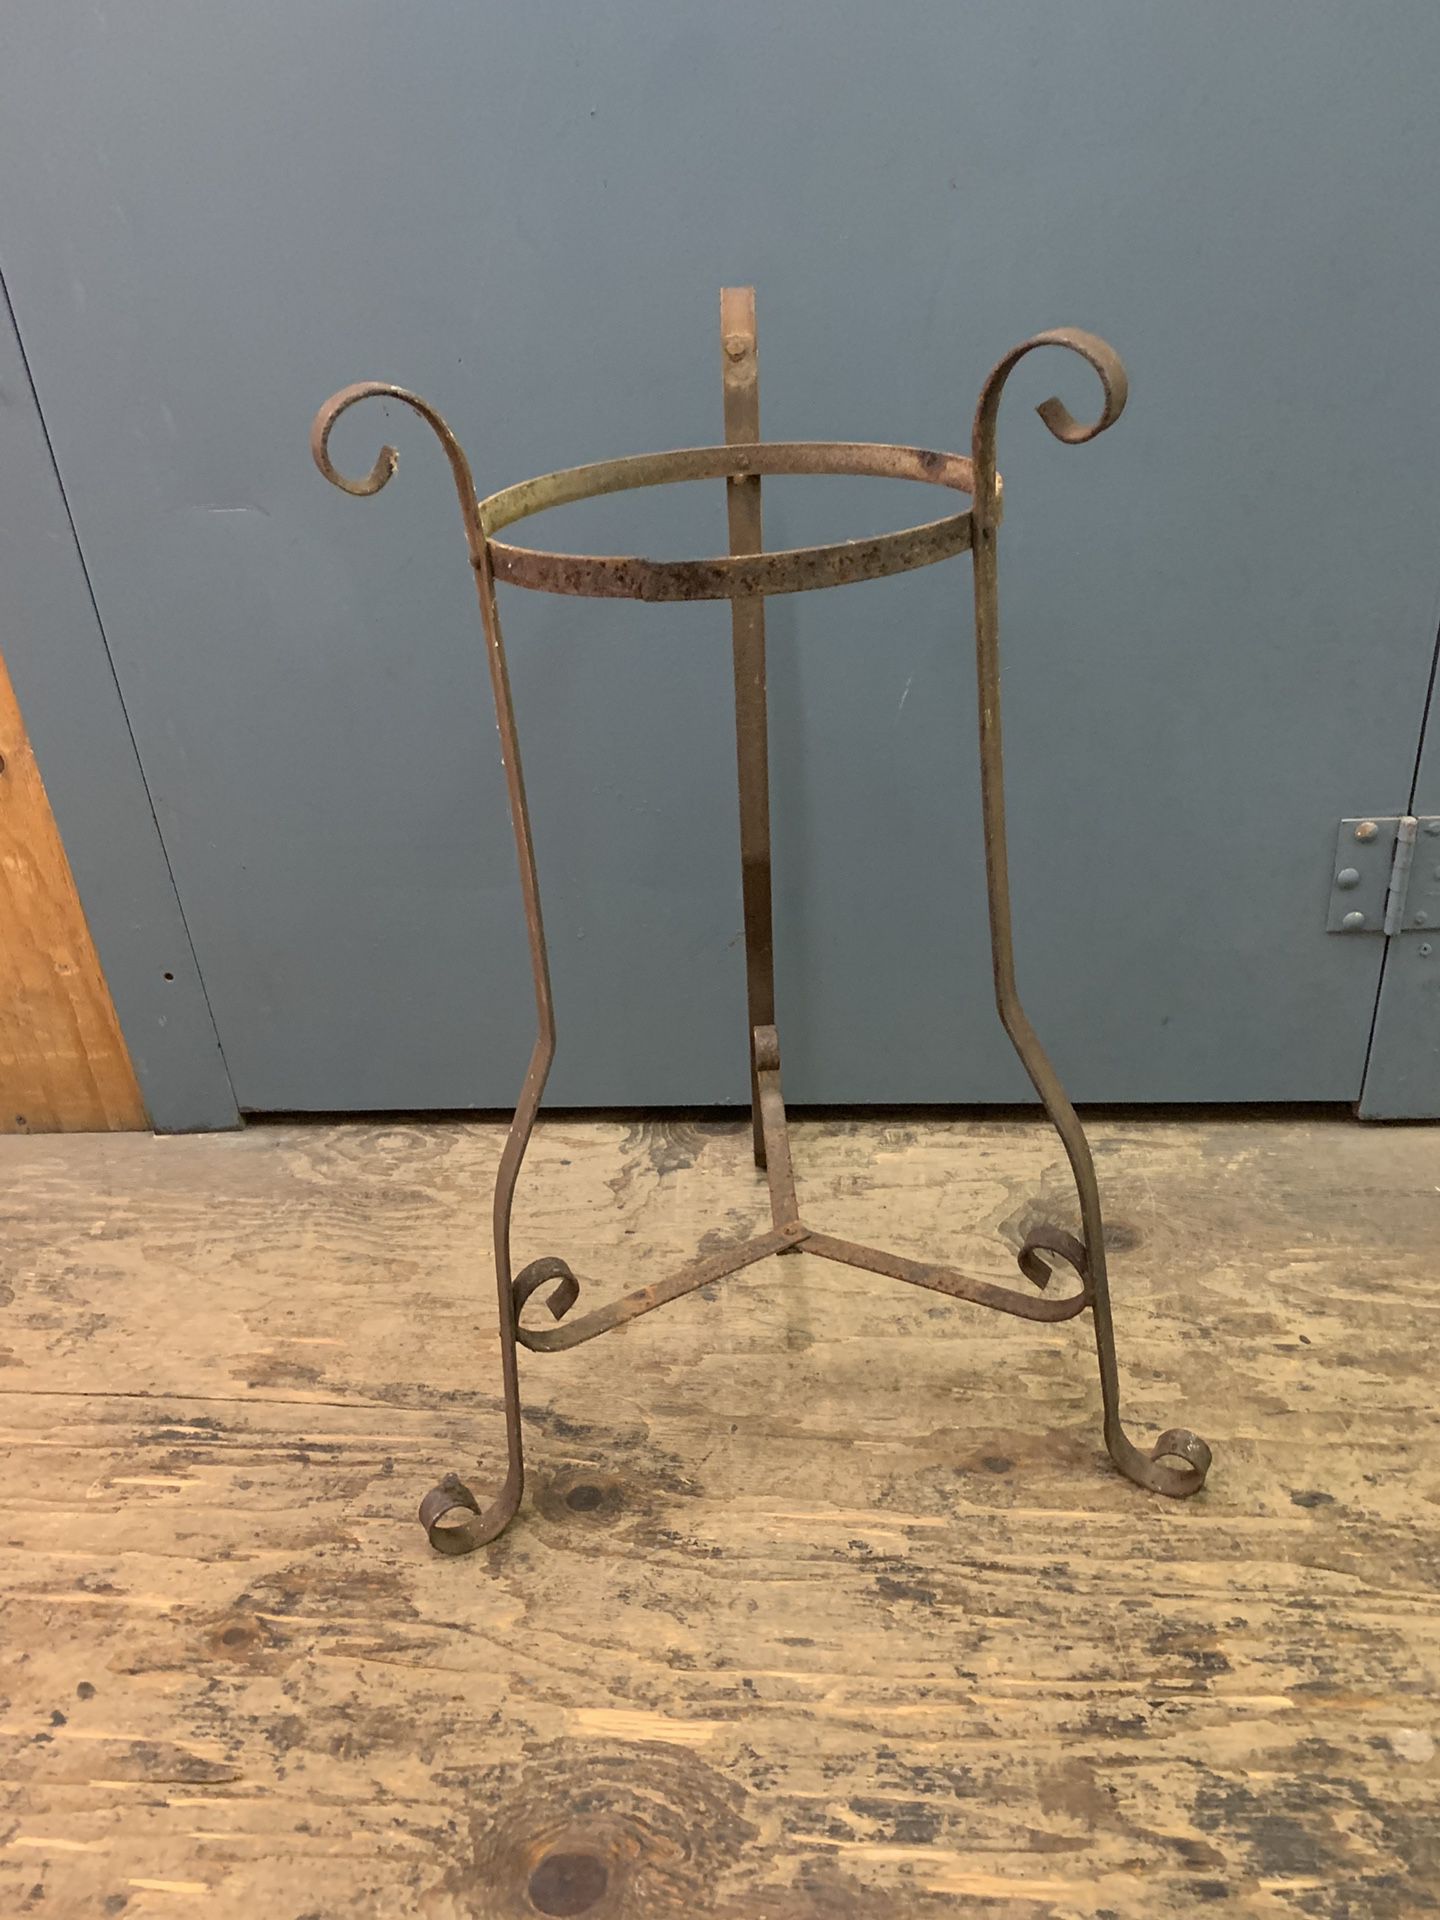 Vintage metal plant stand stands level and will hold a large pot